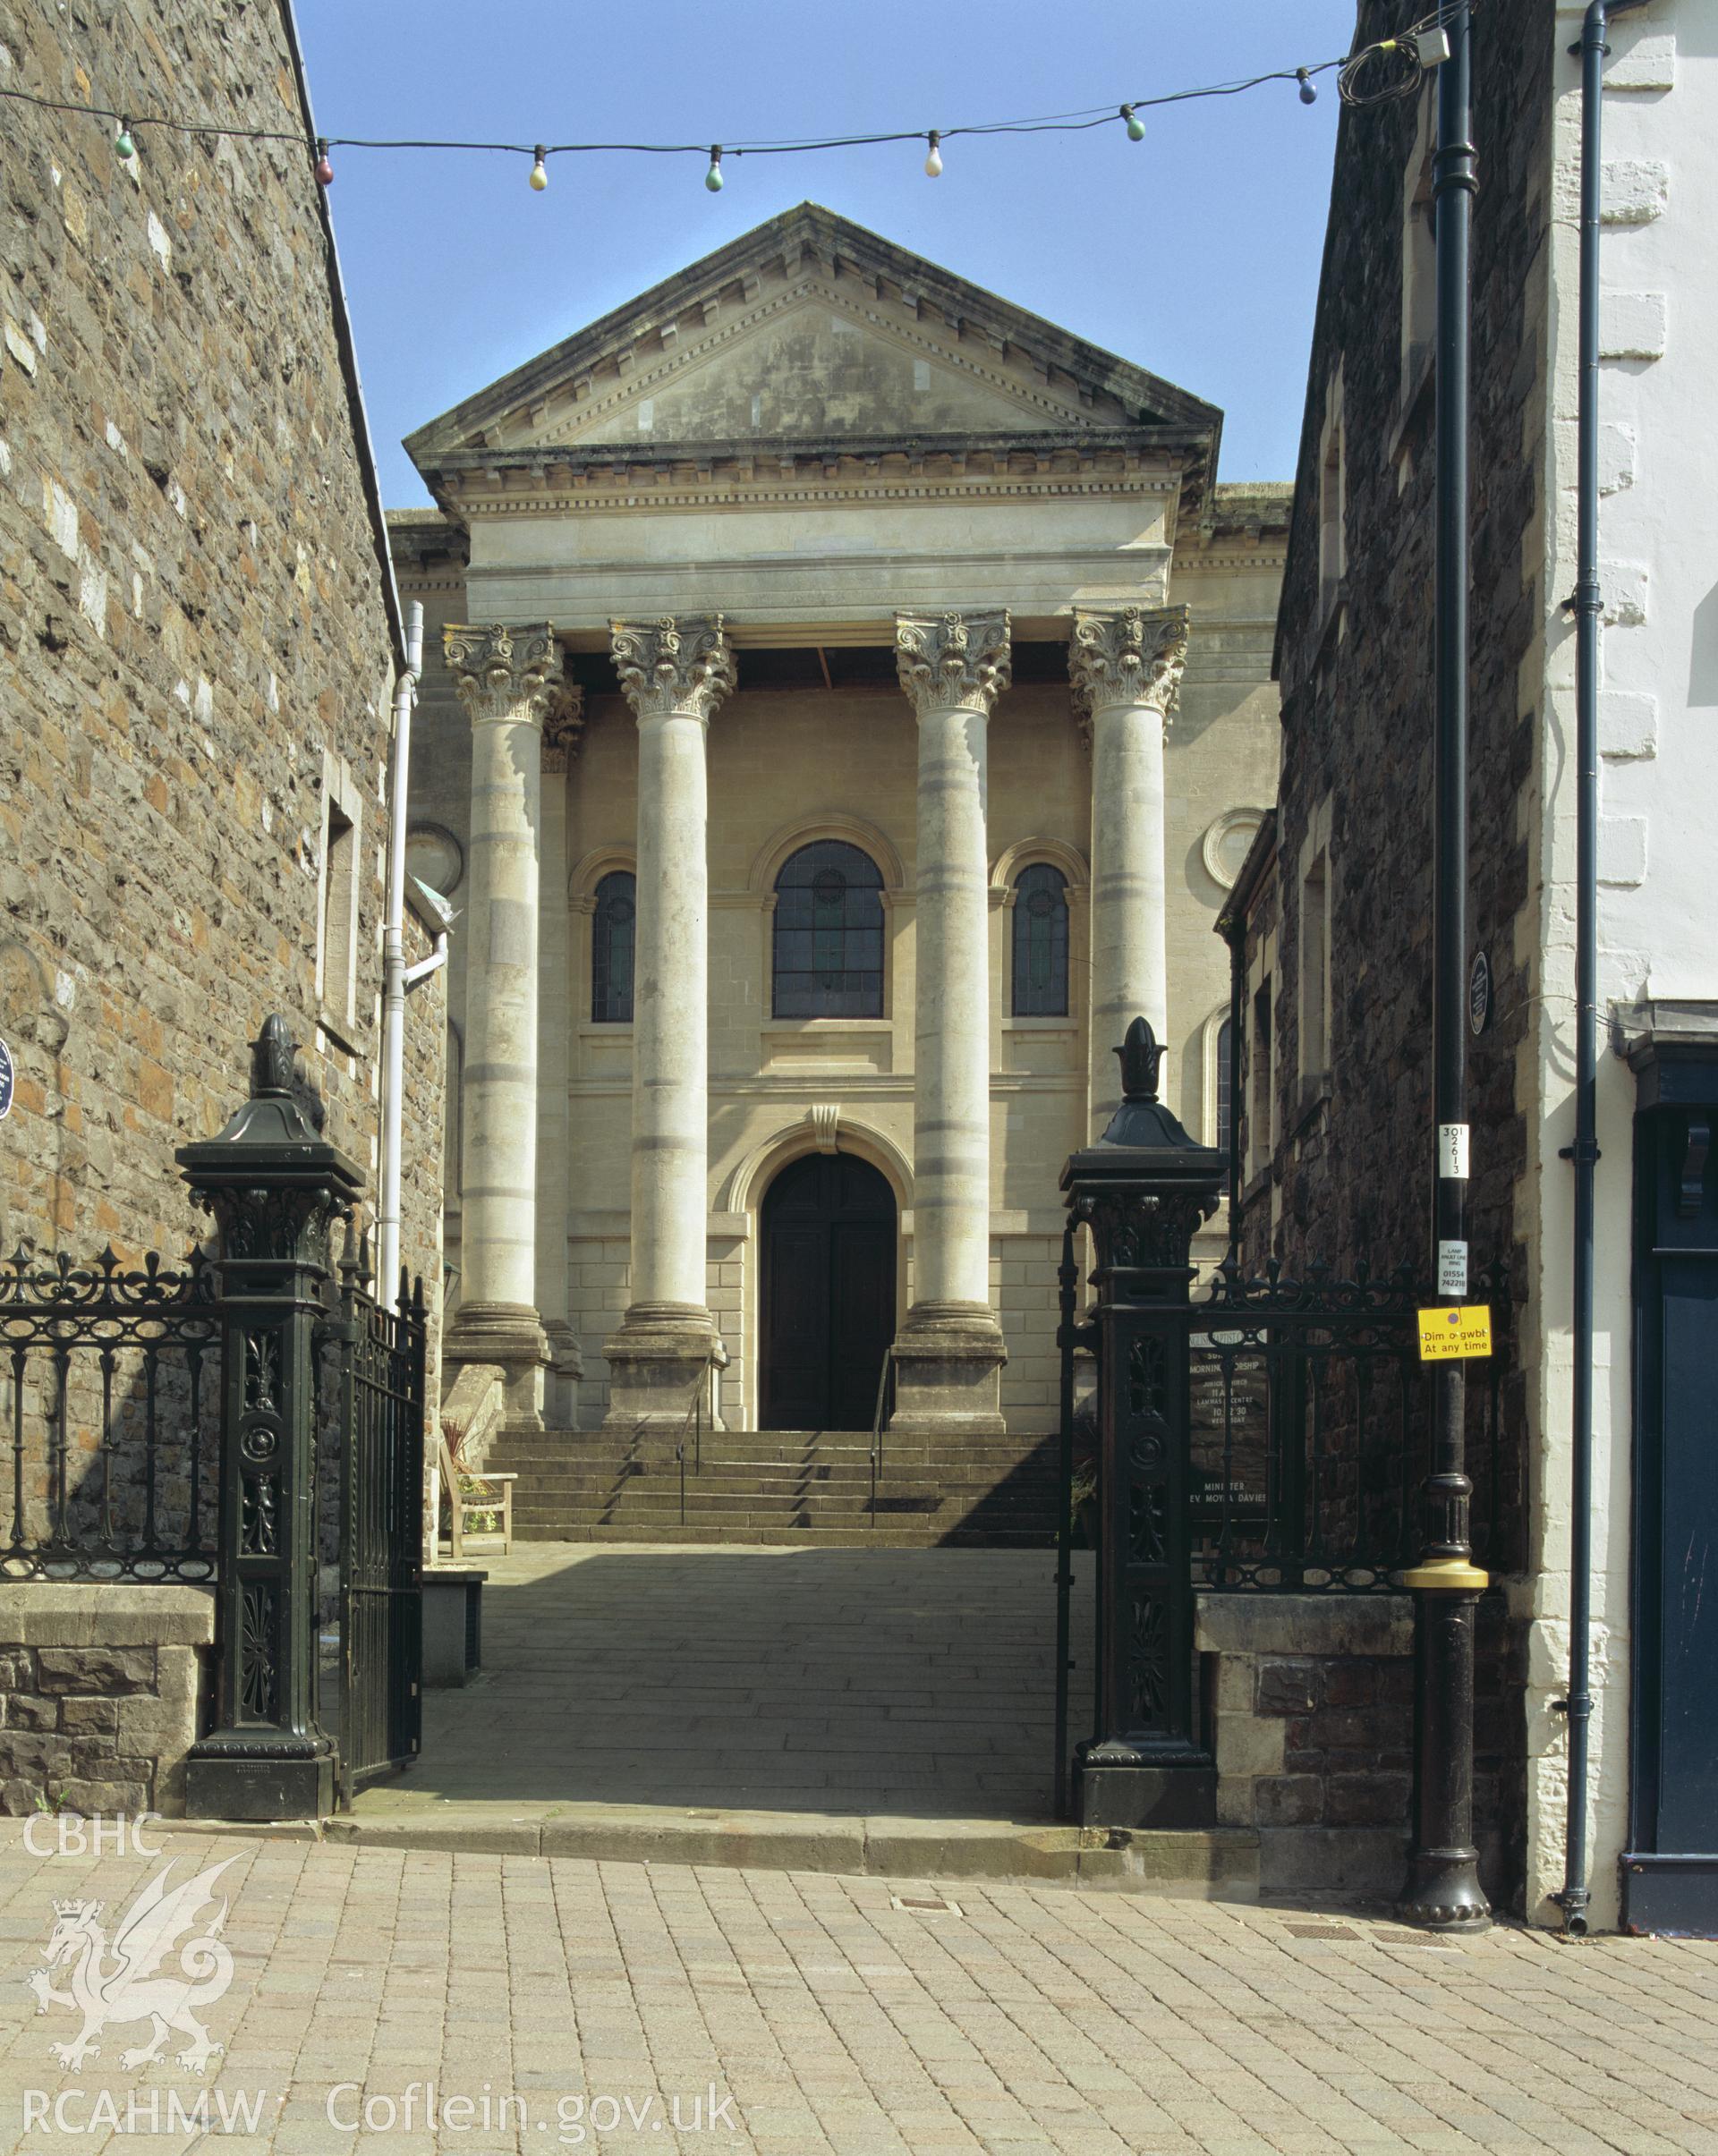 Colour transparency showing exterior view of English Baptist Chapel, Lammas Street, Carmarthen, produced by Iain Wright, June 2004.